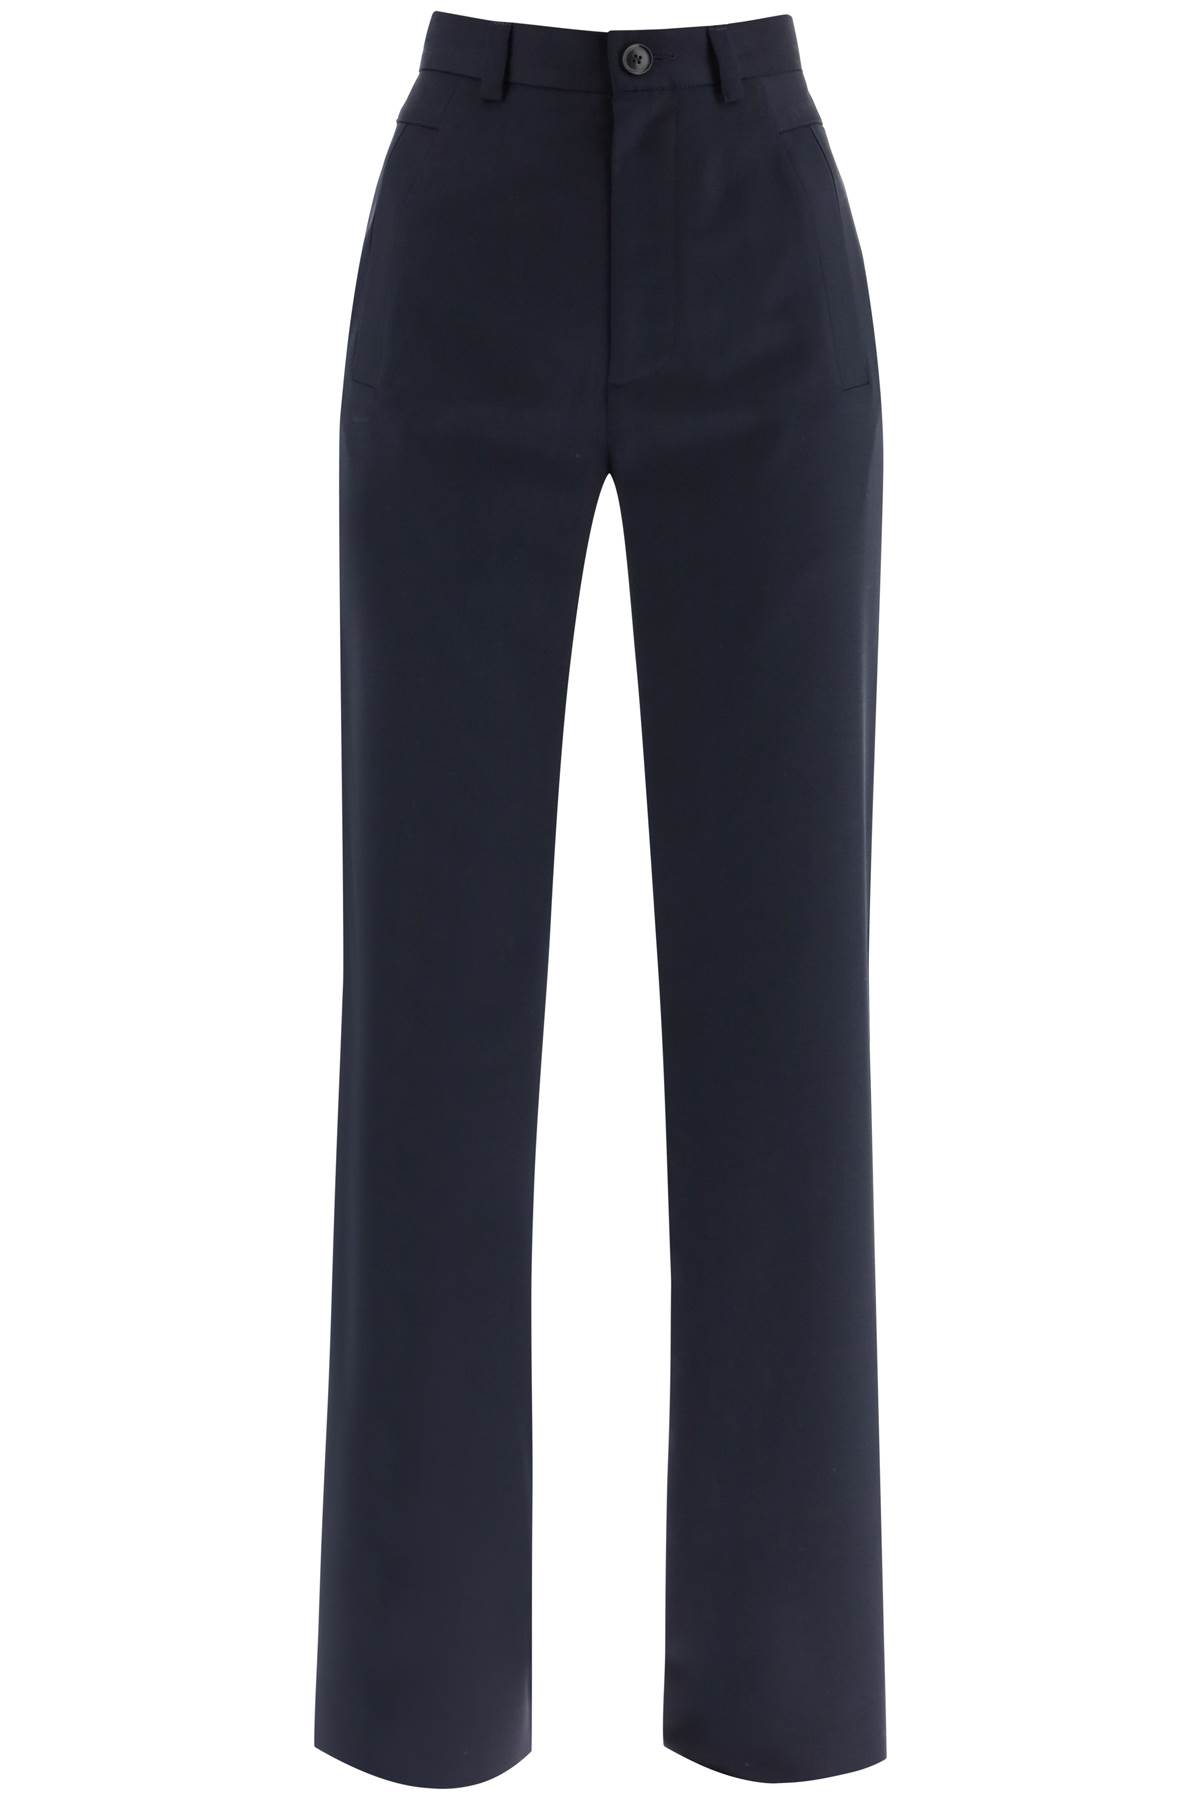 Vivienne Westwood new Ray Wool Trousers